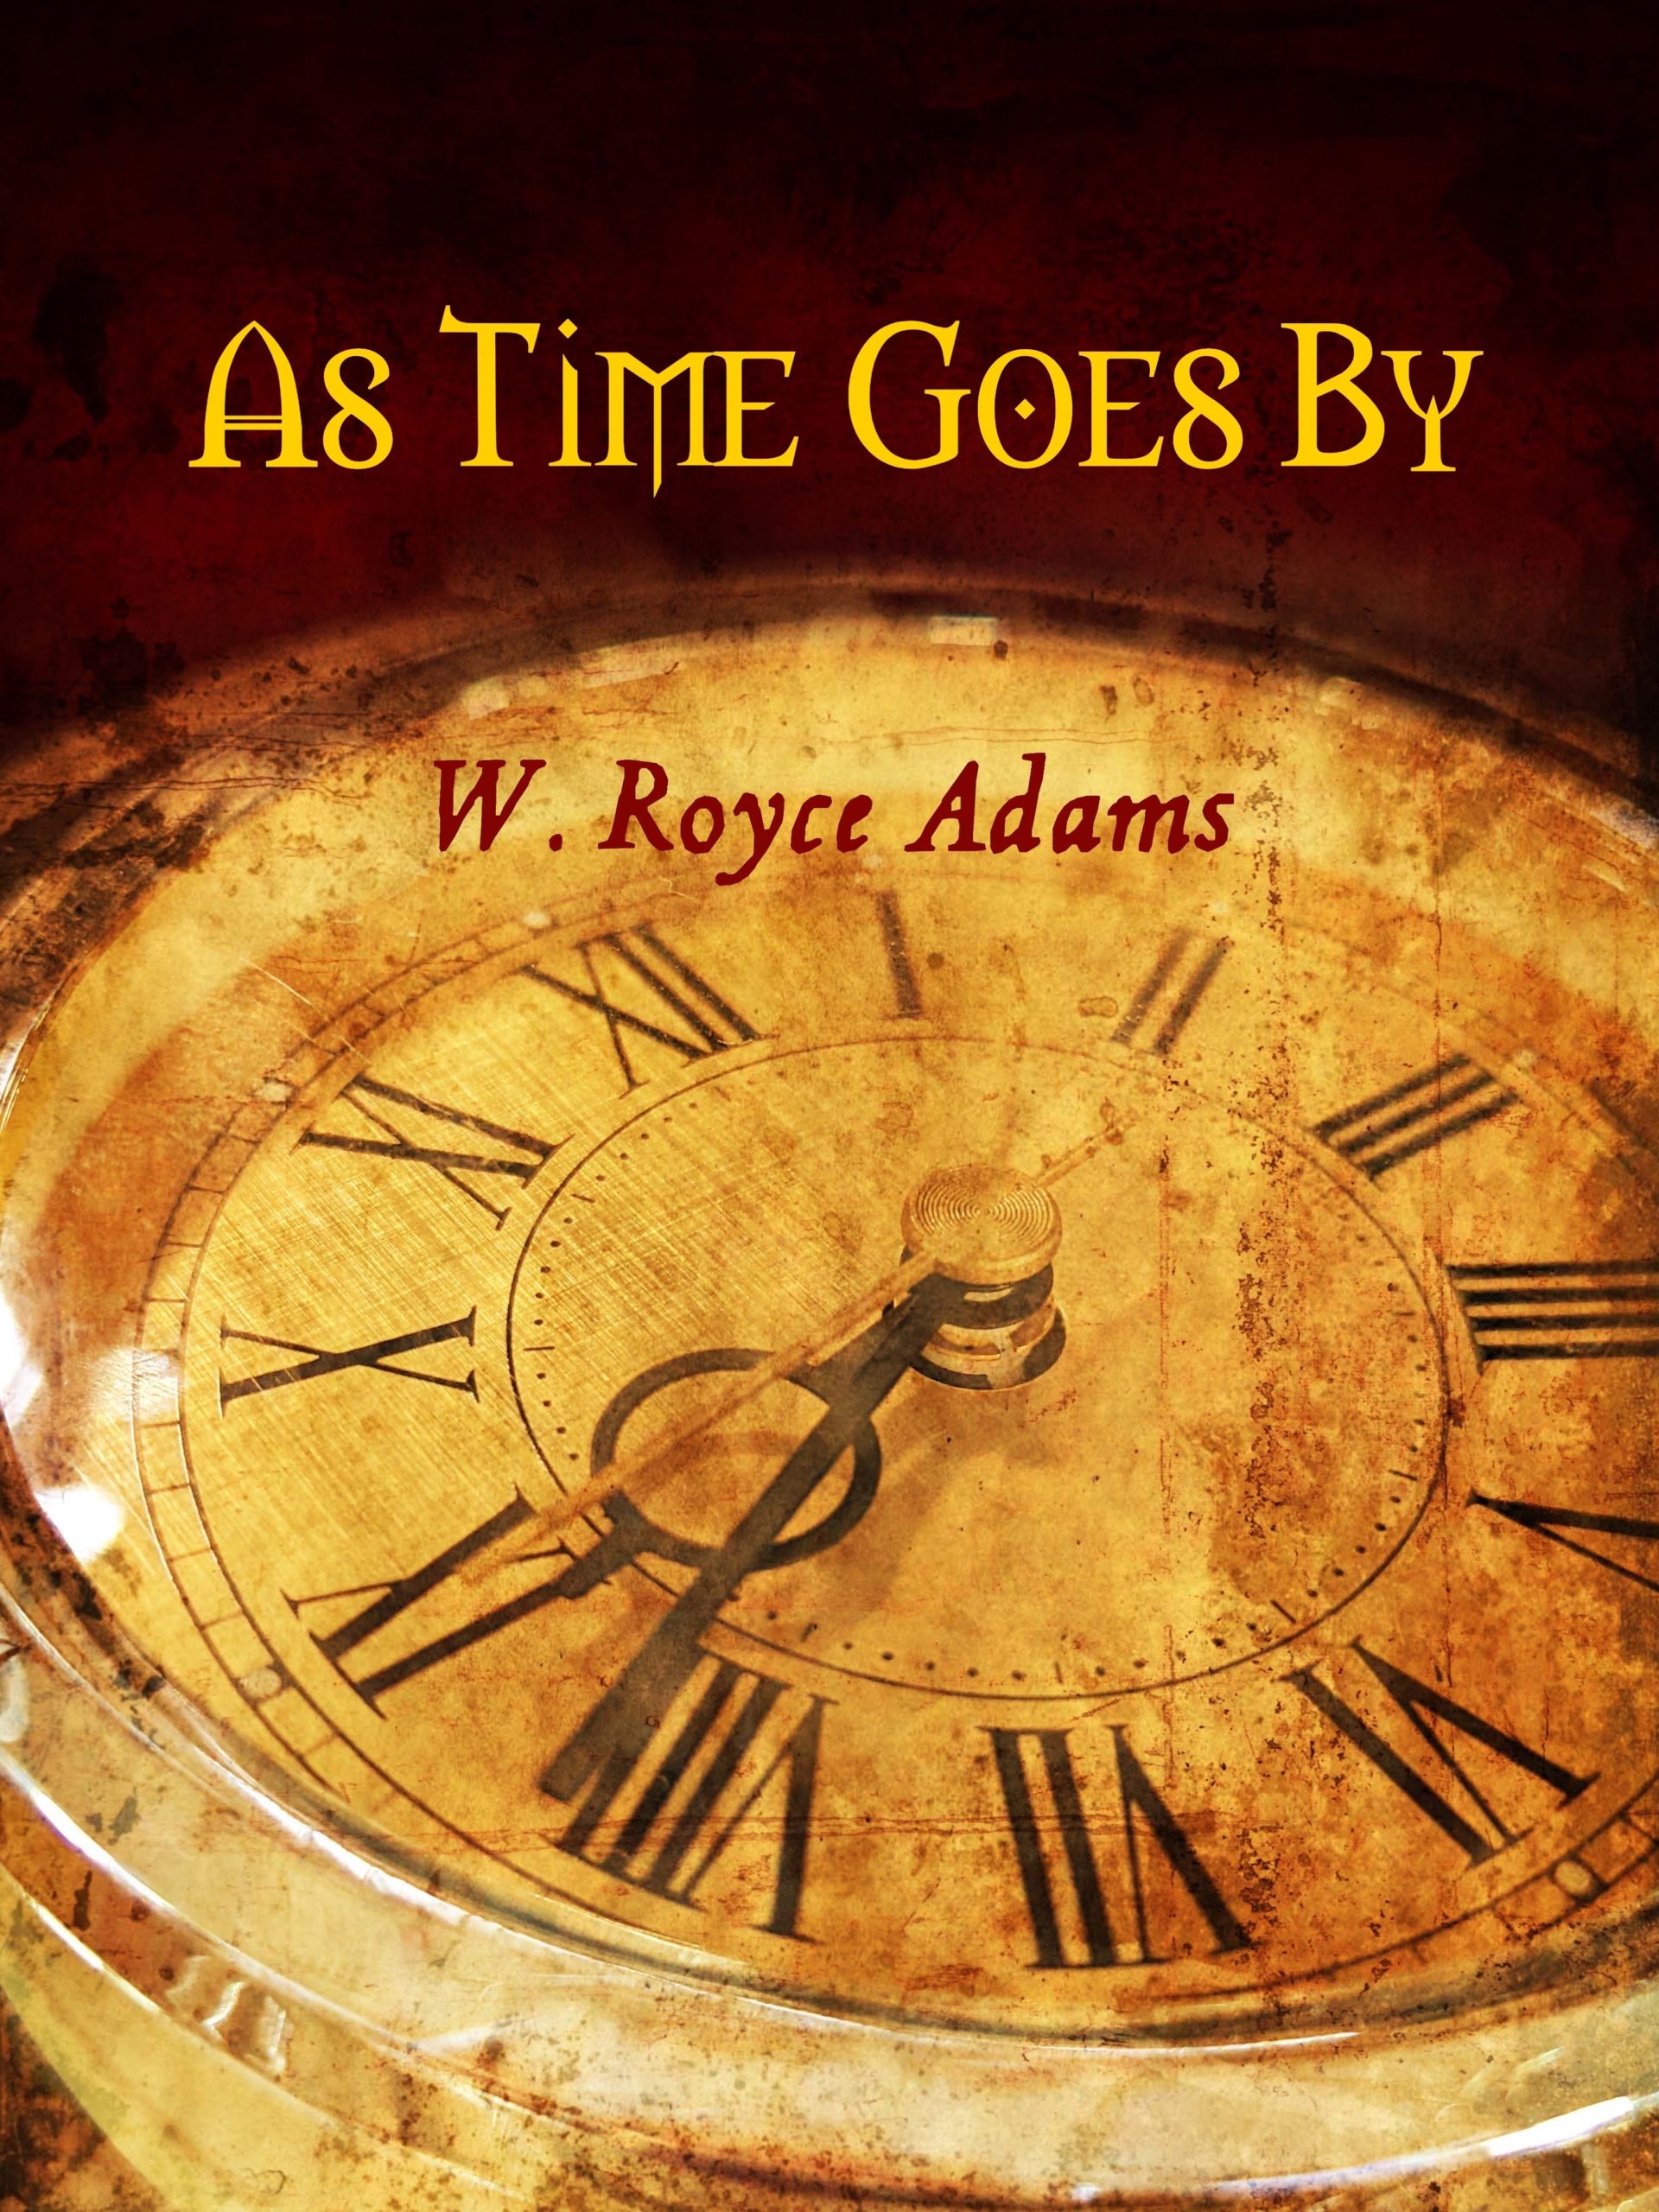 As Time Goes By  by Royce Adams